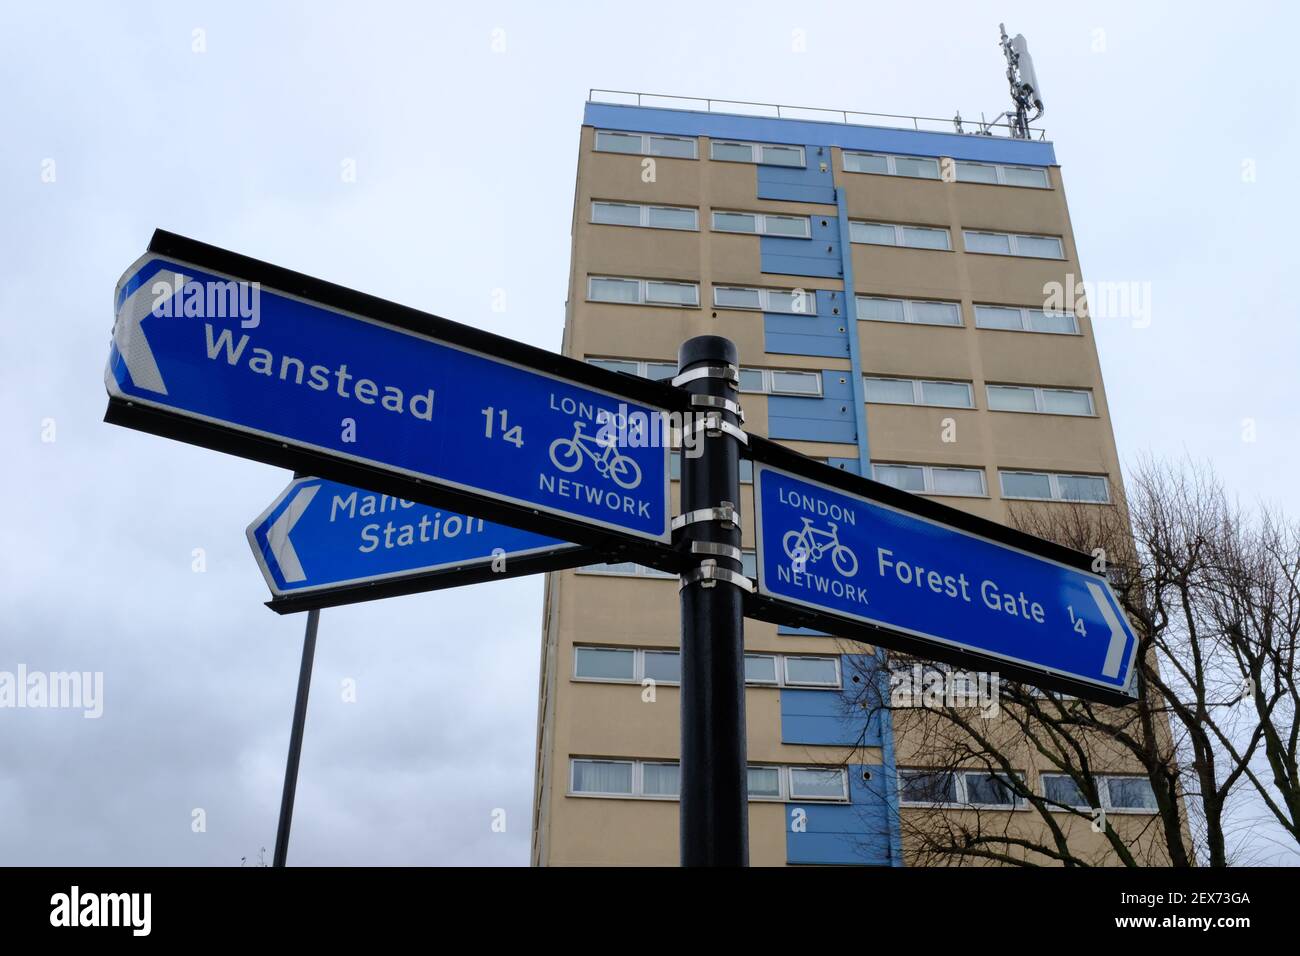 FOREST GATE, LONDON - 4TH MARCH 2021: London Cycle network signpost for directions to Wanstead & Forest Gate. Stock Photo